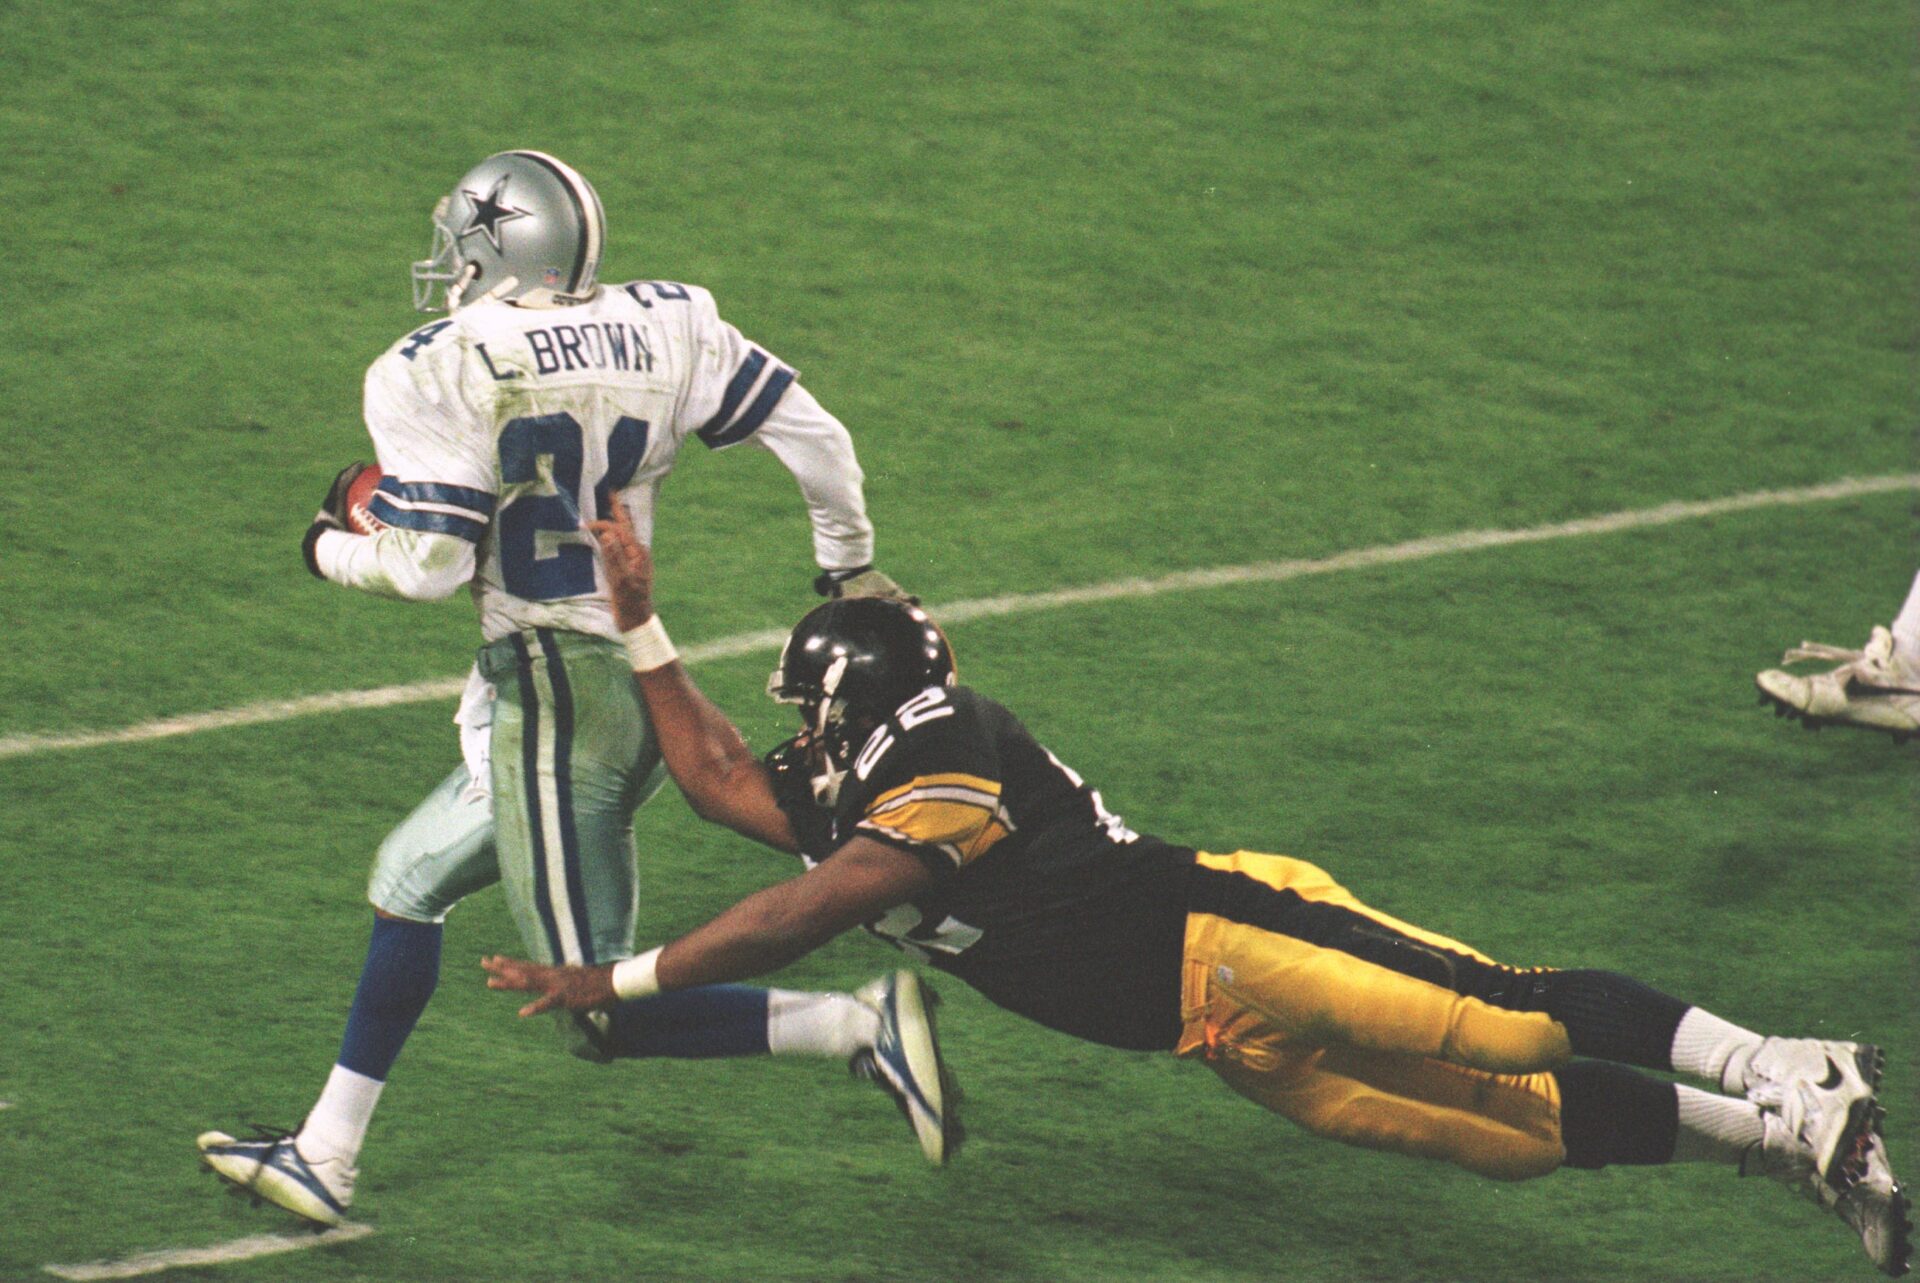 28 Jan 1996: Cornerback Larry Brown #24 of the Dallas Cowboys is knocked out of bounds by running back John L. Williams #22 of the Pittsburgh Steelers during the 4th quarter of the Cowboys game versus the Pittsburgh Steelers in Super Bowl XXX at Sun Devi